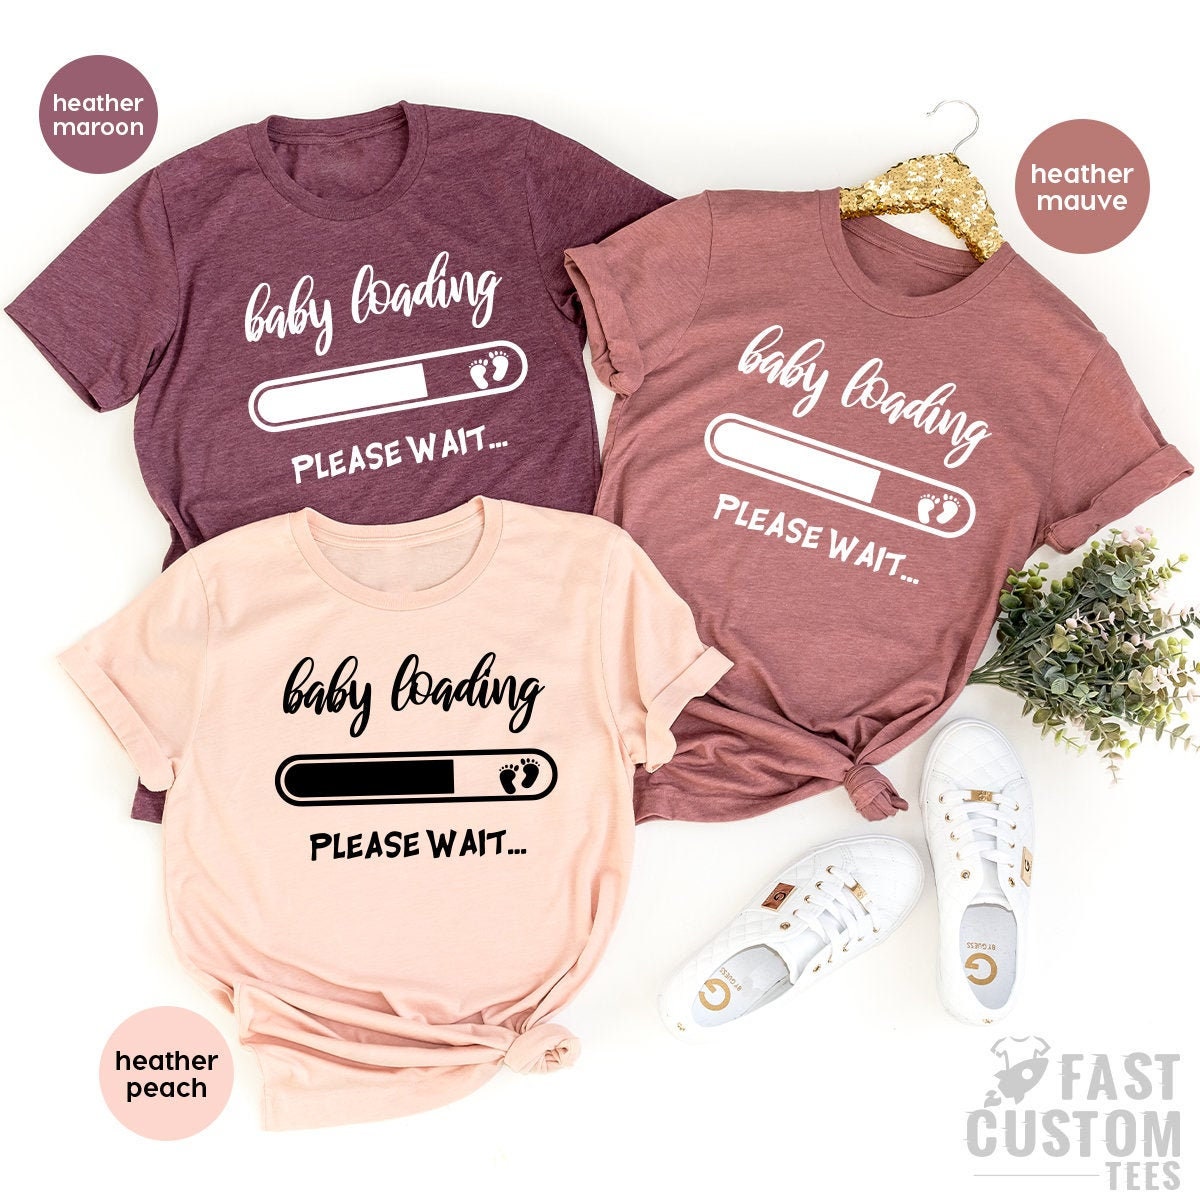 NEW MOM GIFTS Funny New Mom Gift Funny Gift for New Mom New 